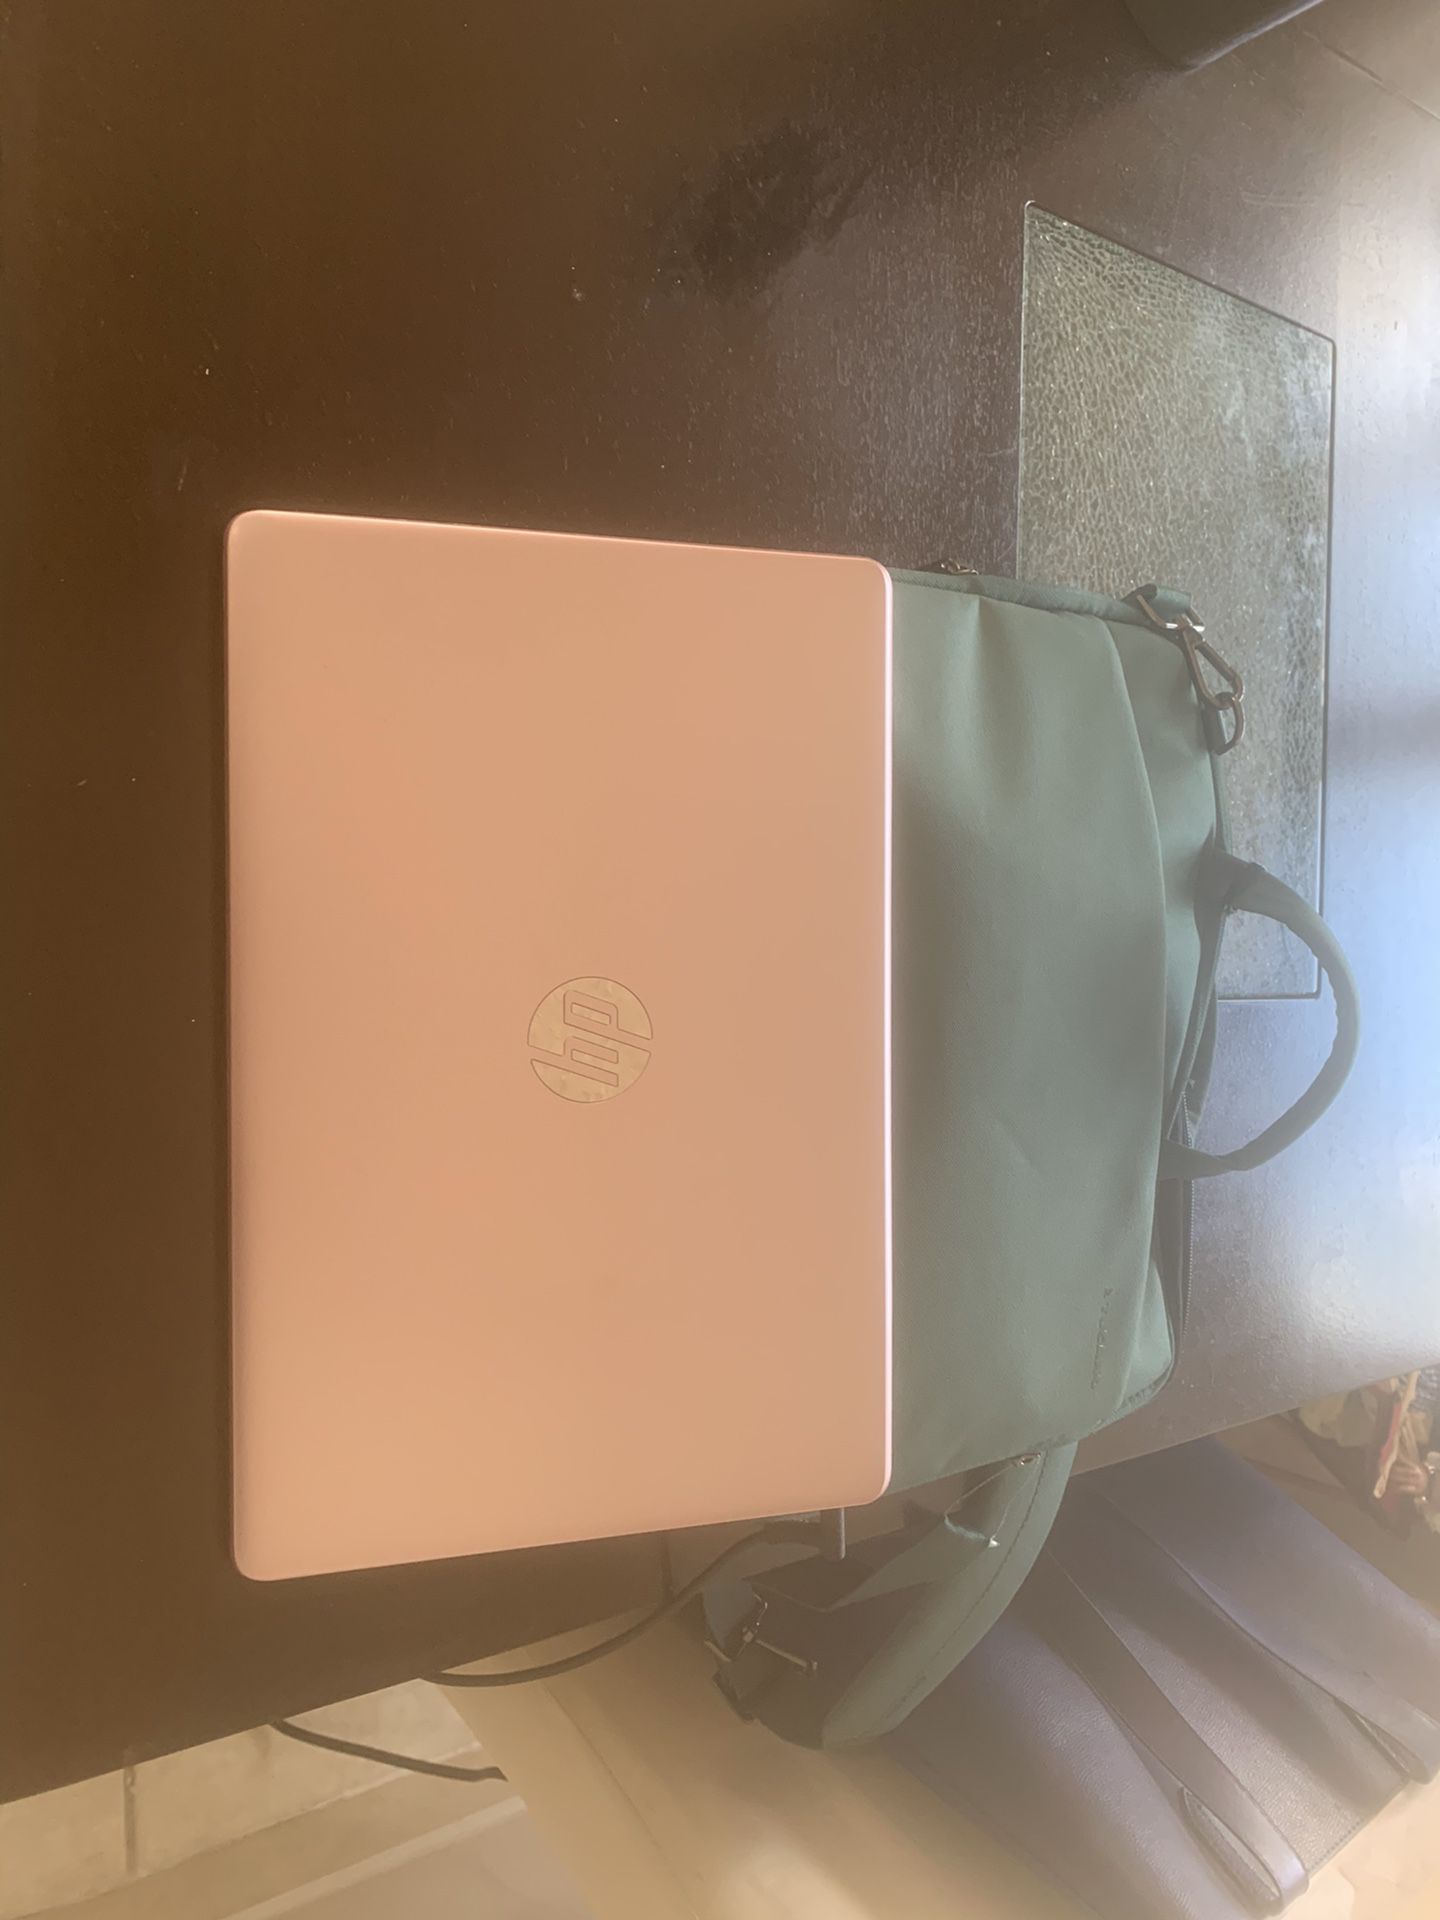 Laptop includes charger and case